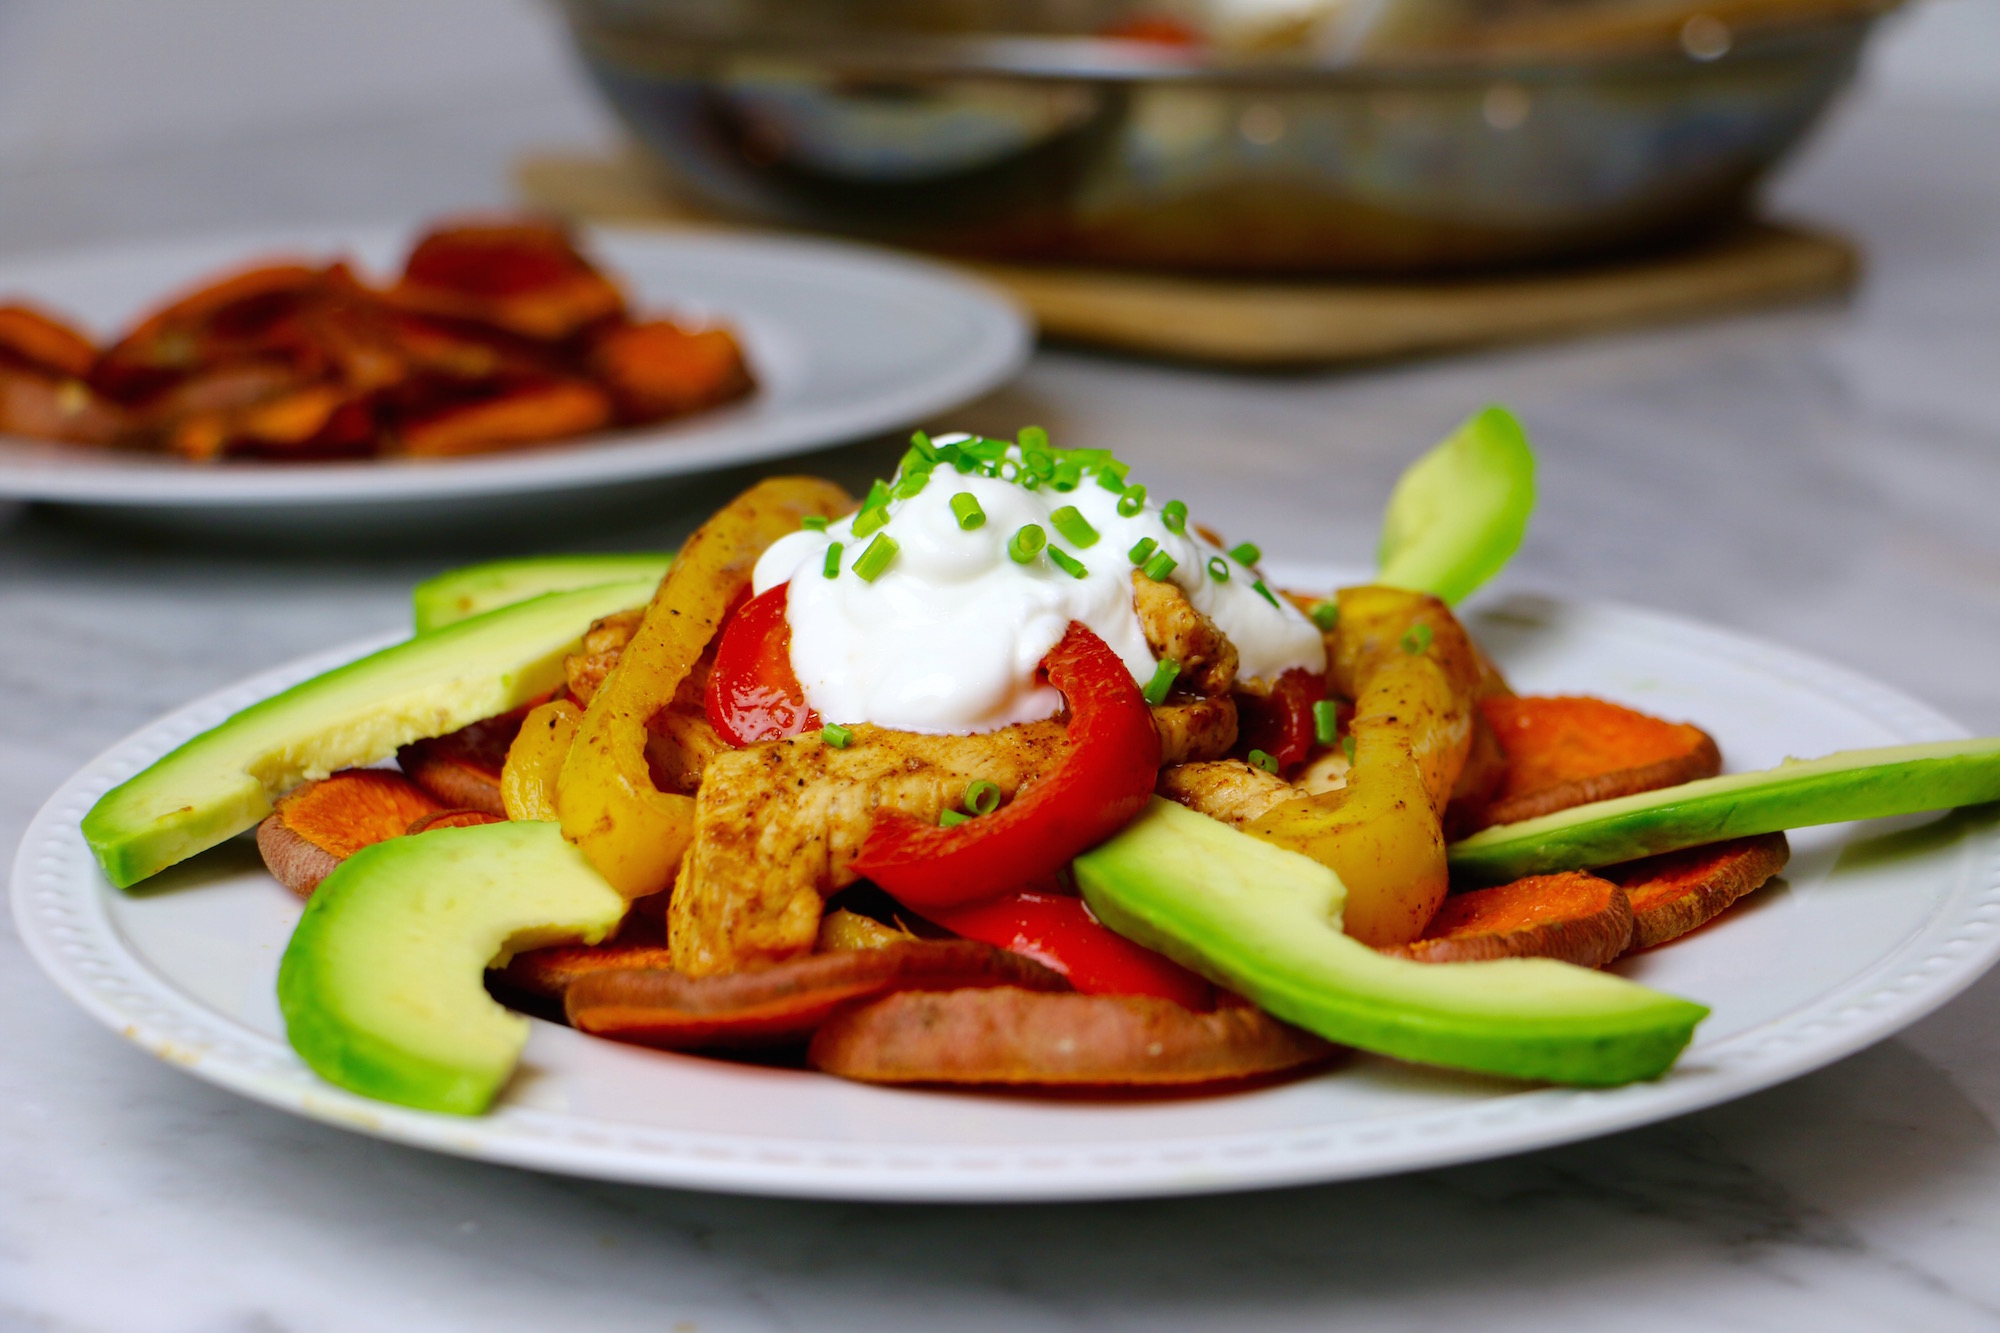 Healthy Chicken Fajita Nachos made with Baked Sweet Potato Chips and topped with organic chicken, red and yellow bell peppers, avocado, and greek yogurt. Gluten-free + can be made vegan by swapping beans. Takes 30 minutes to make!